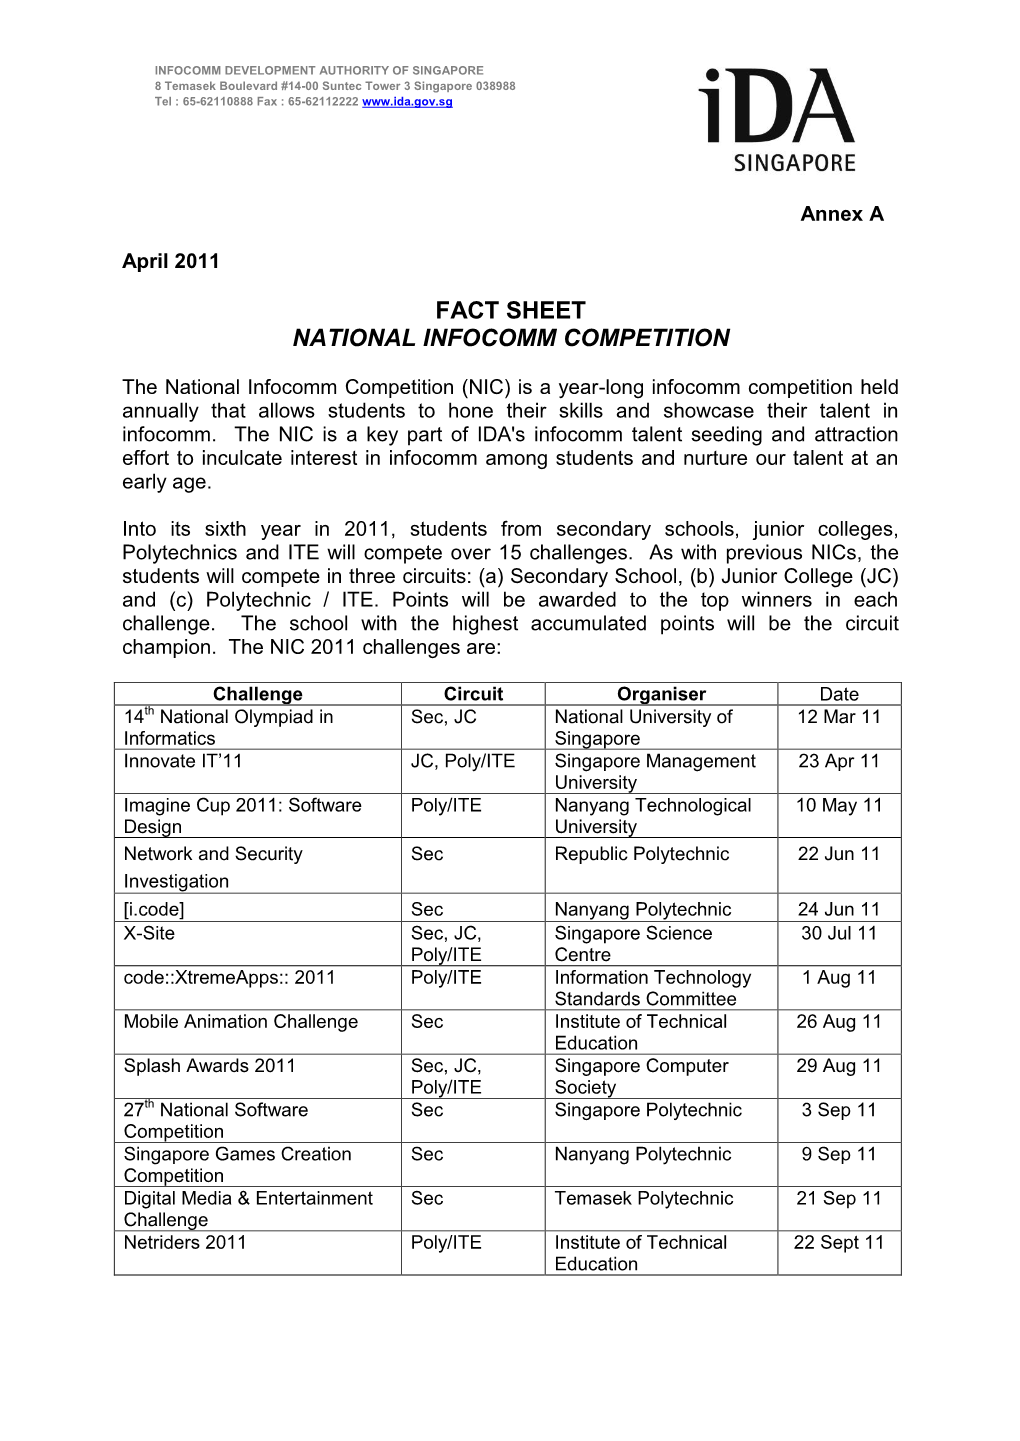 Fact Sheet National Infocomm Competition